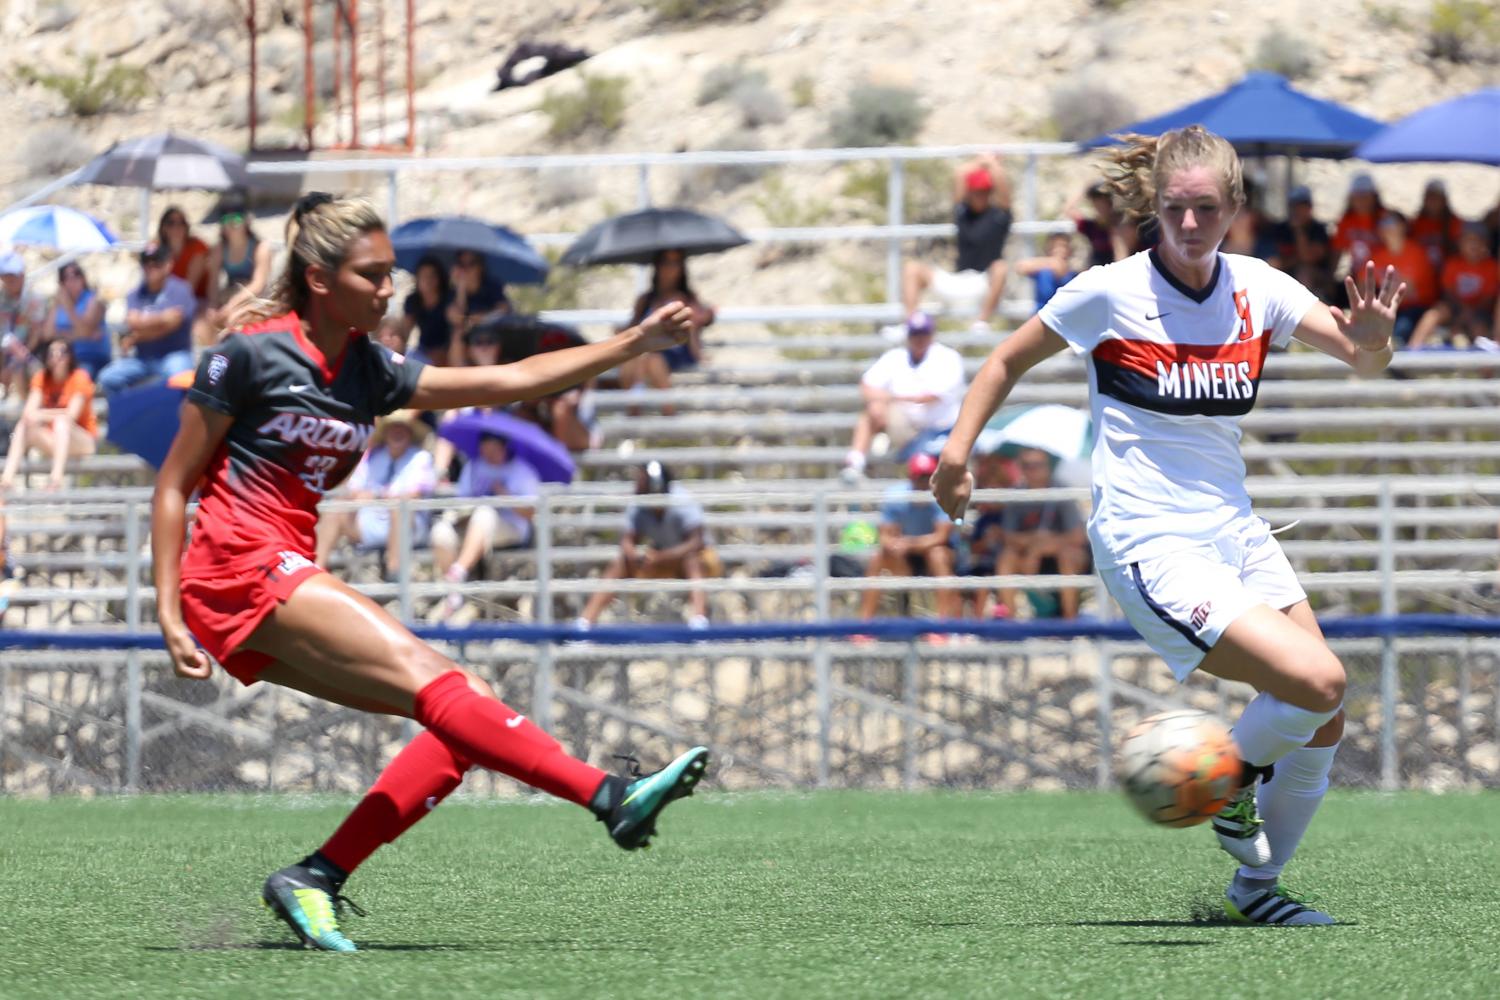 UTEP+womens+soccer+falls+to+Arizona+in+exhibition+game